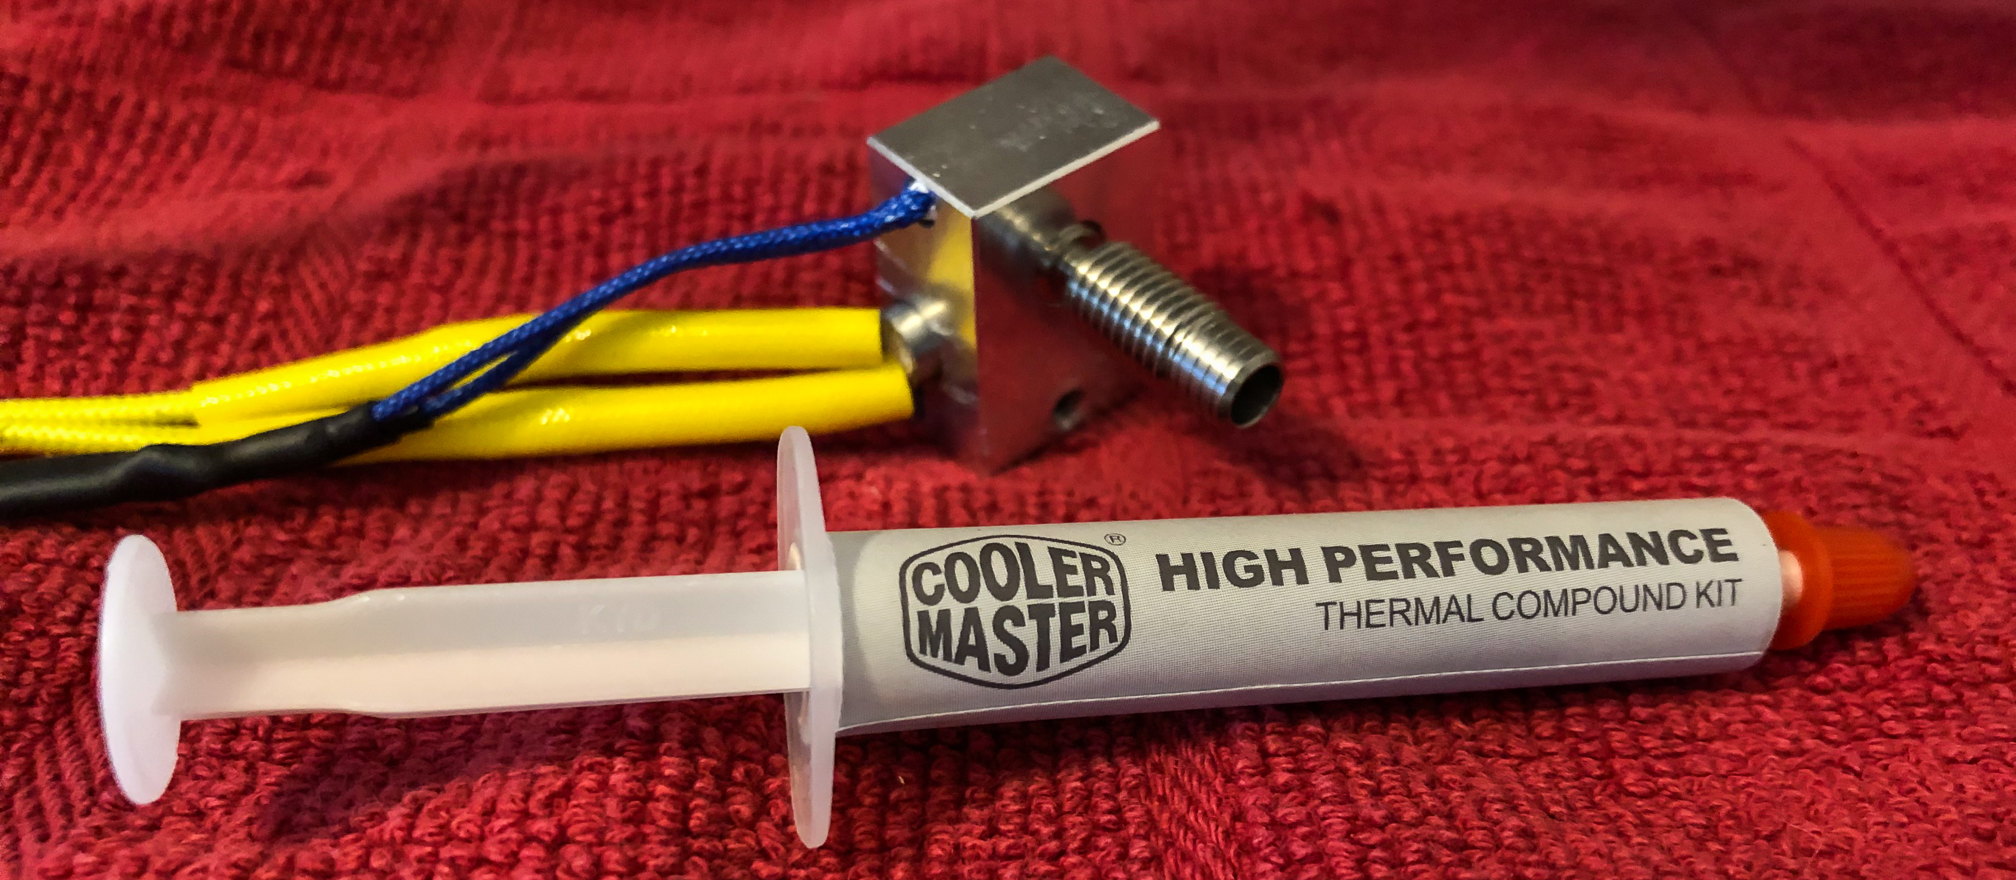 Thermal compound